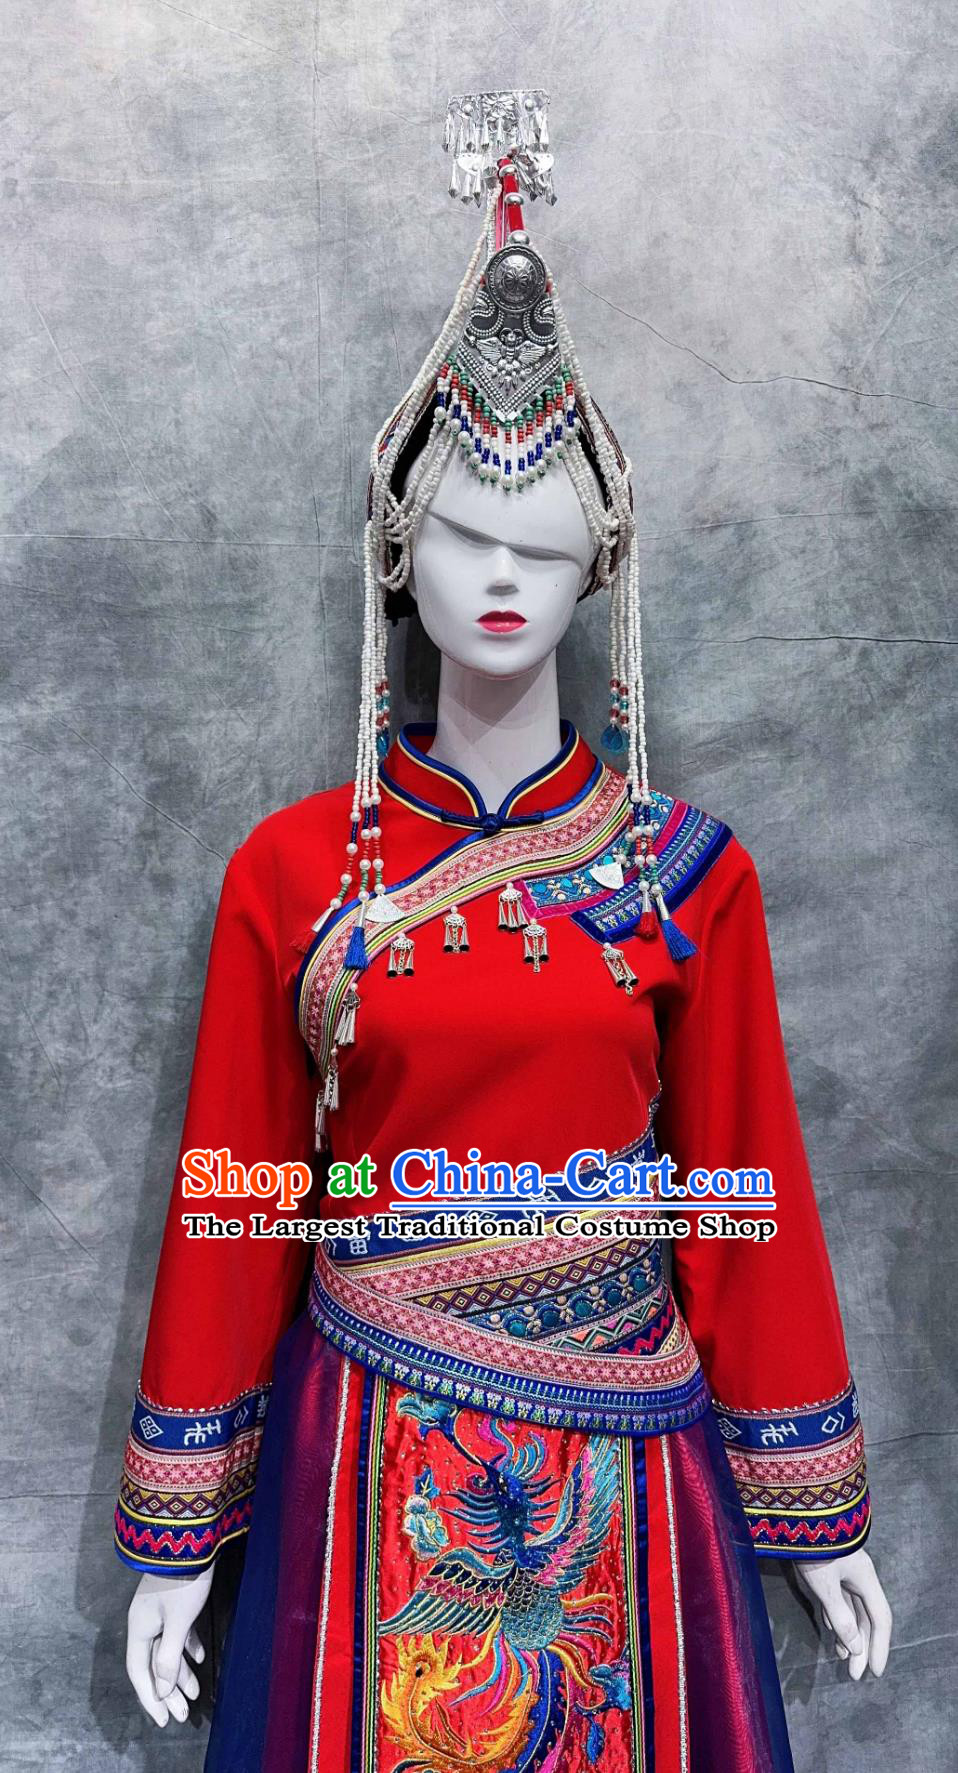 Chinese March rd Stage Show Costume She Ethnic Woman Clothing China National Minority Wedding Red Shirt and Skirt